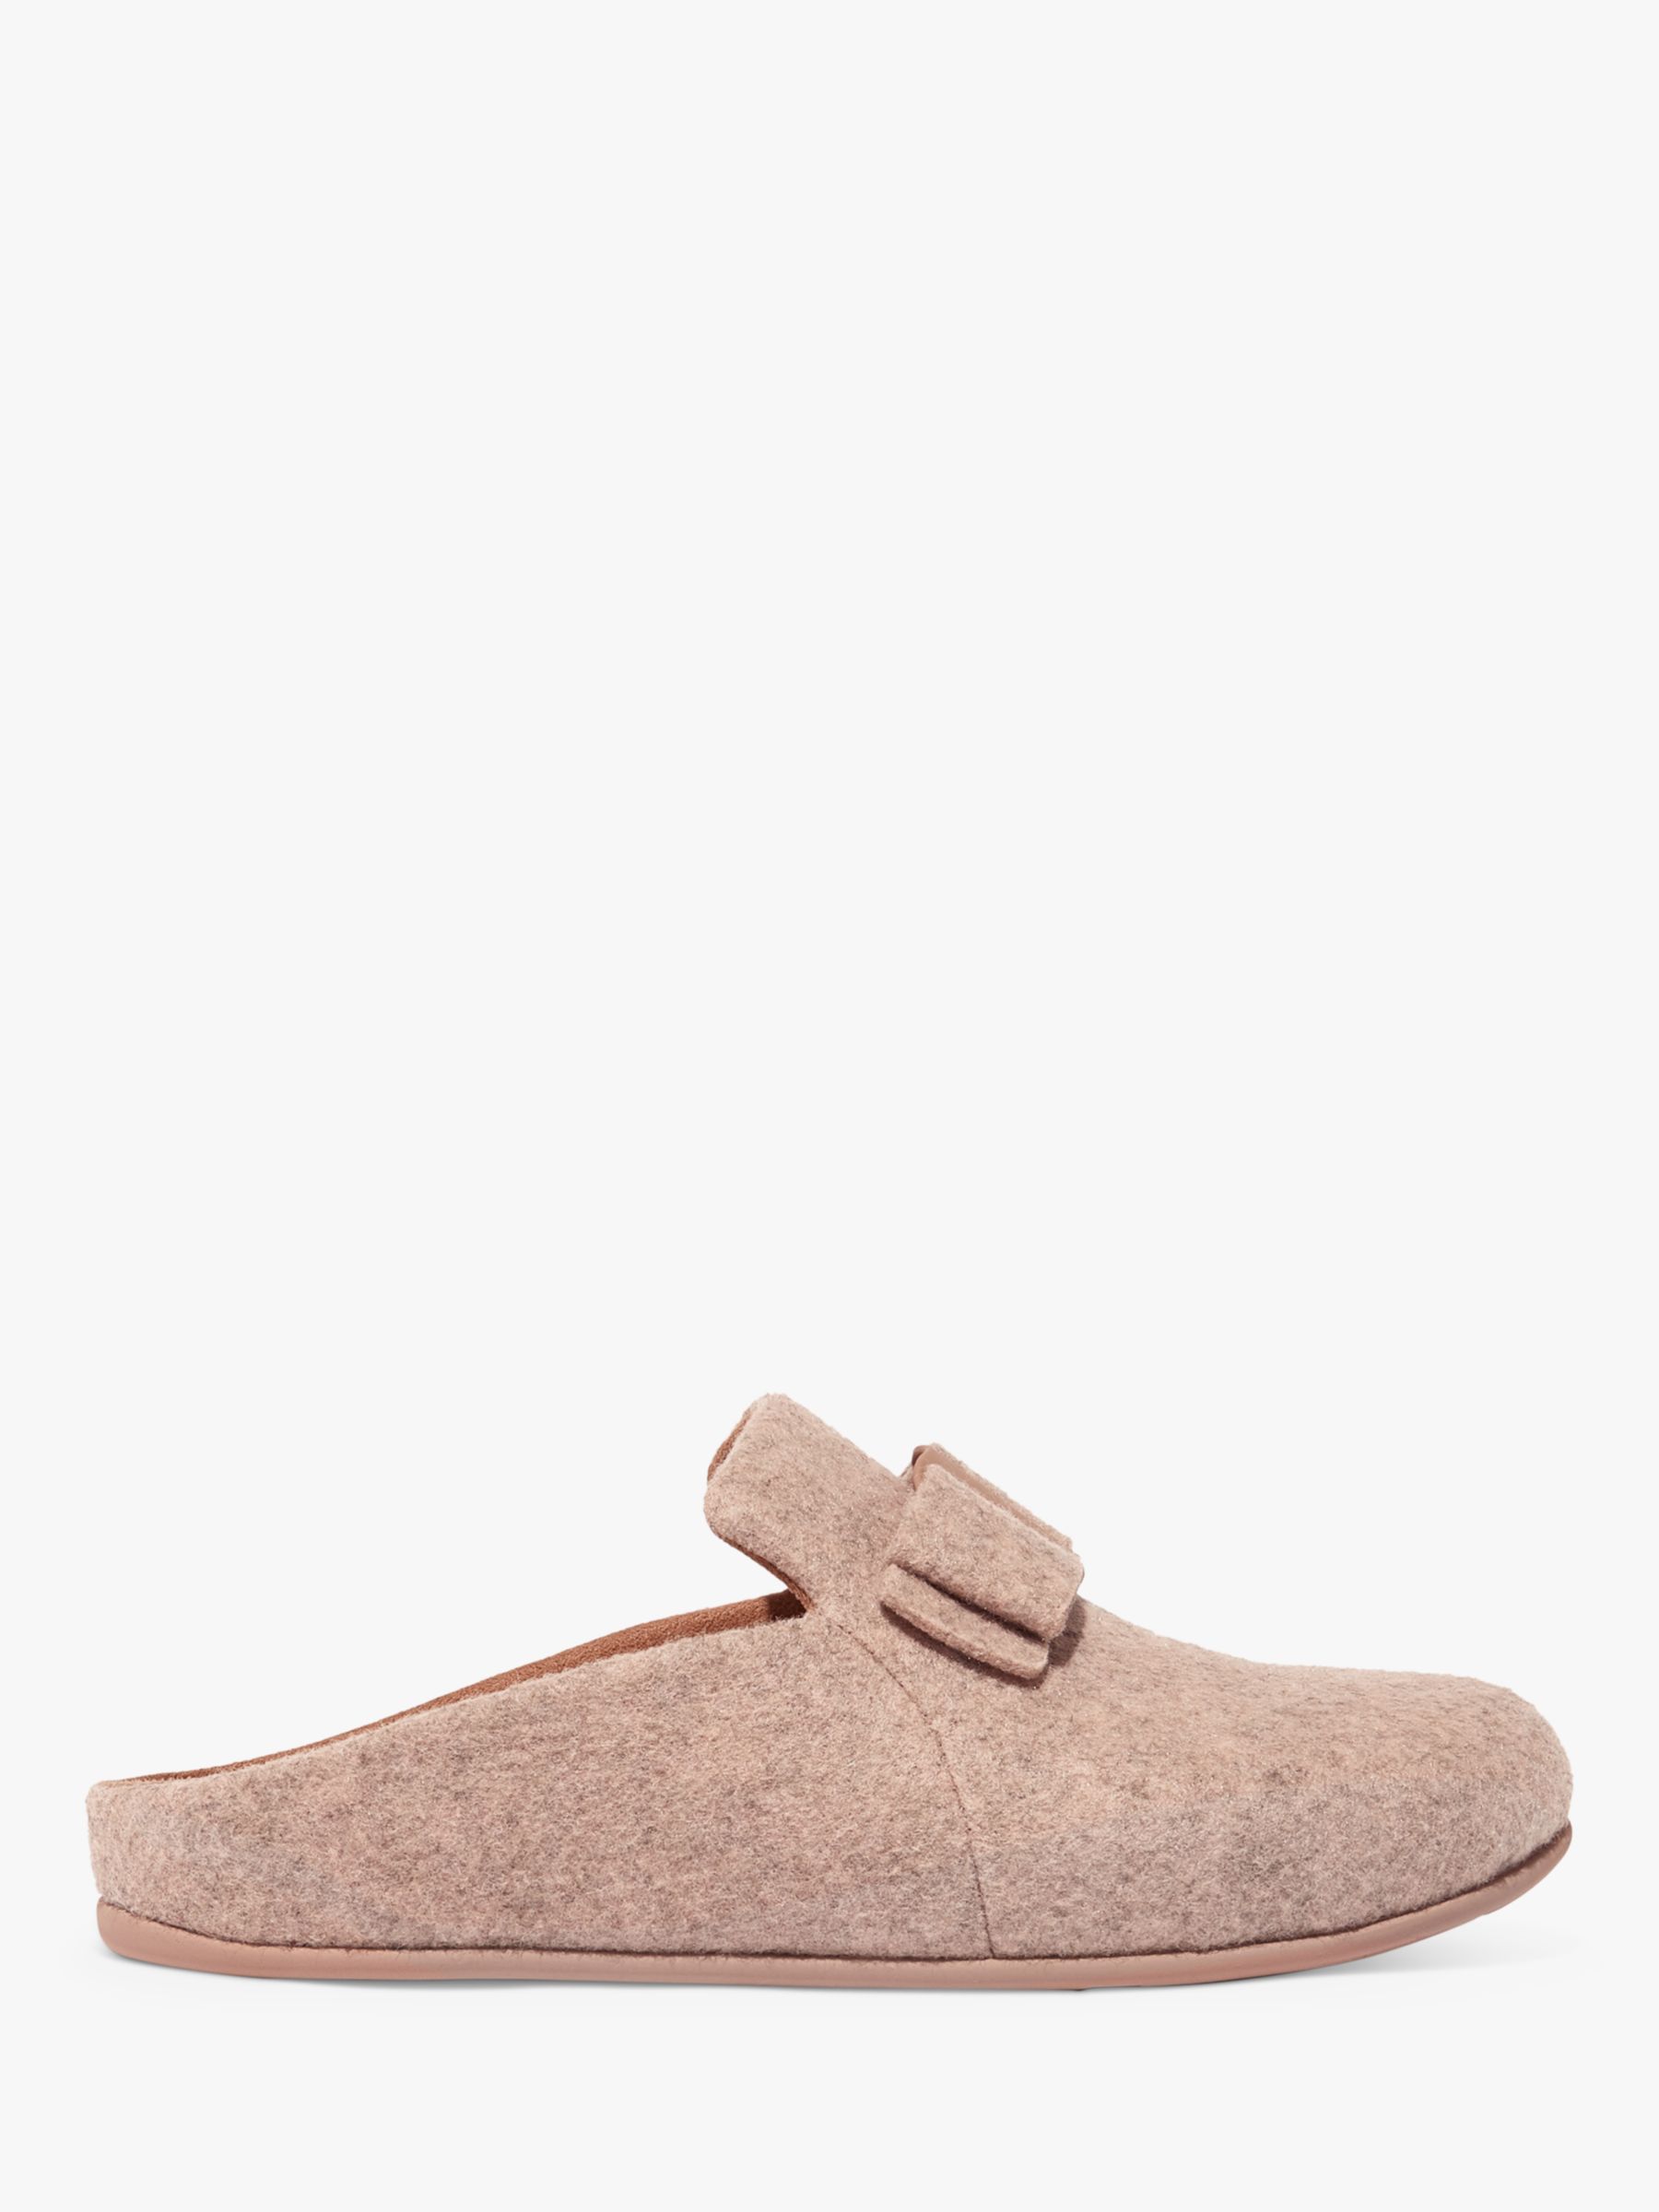 FitFlop Bow Mule Slippers, Beige at John Lewis & Partners